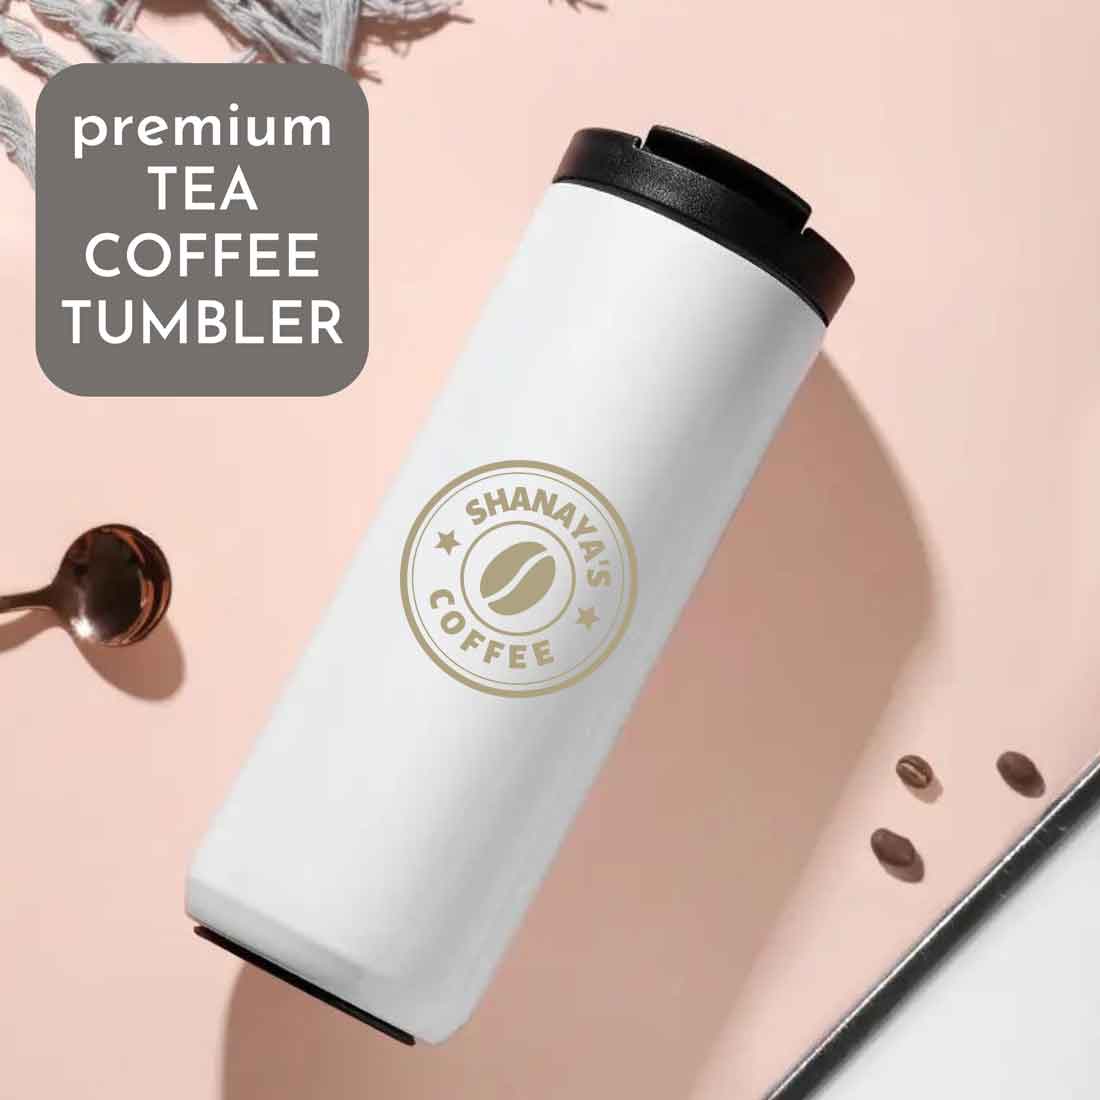 Personalised Tea Travel Mug with Lid Name Engraved Stainless Steel Flask (400ML)